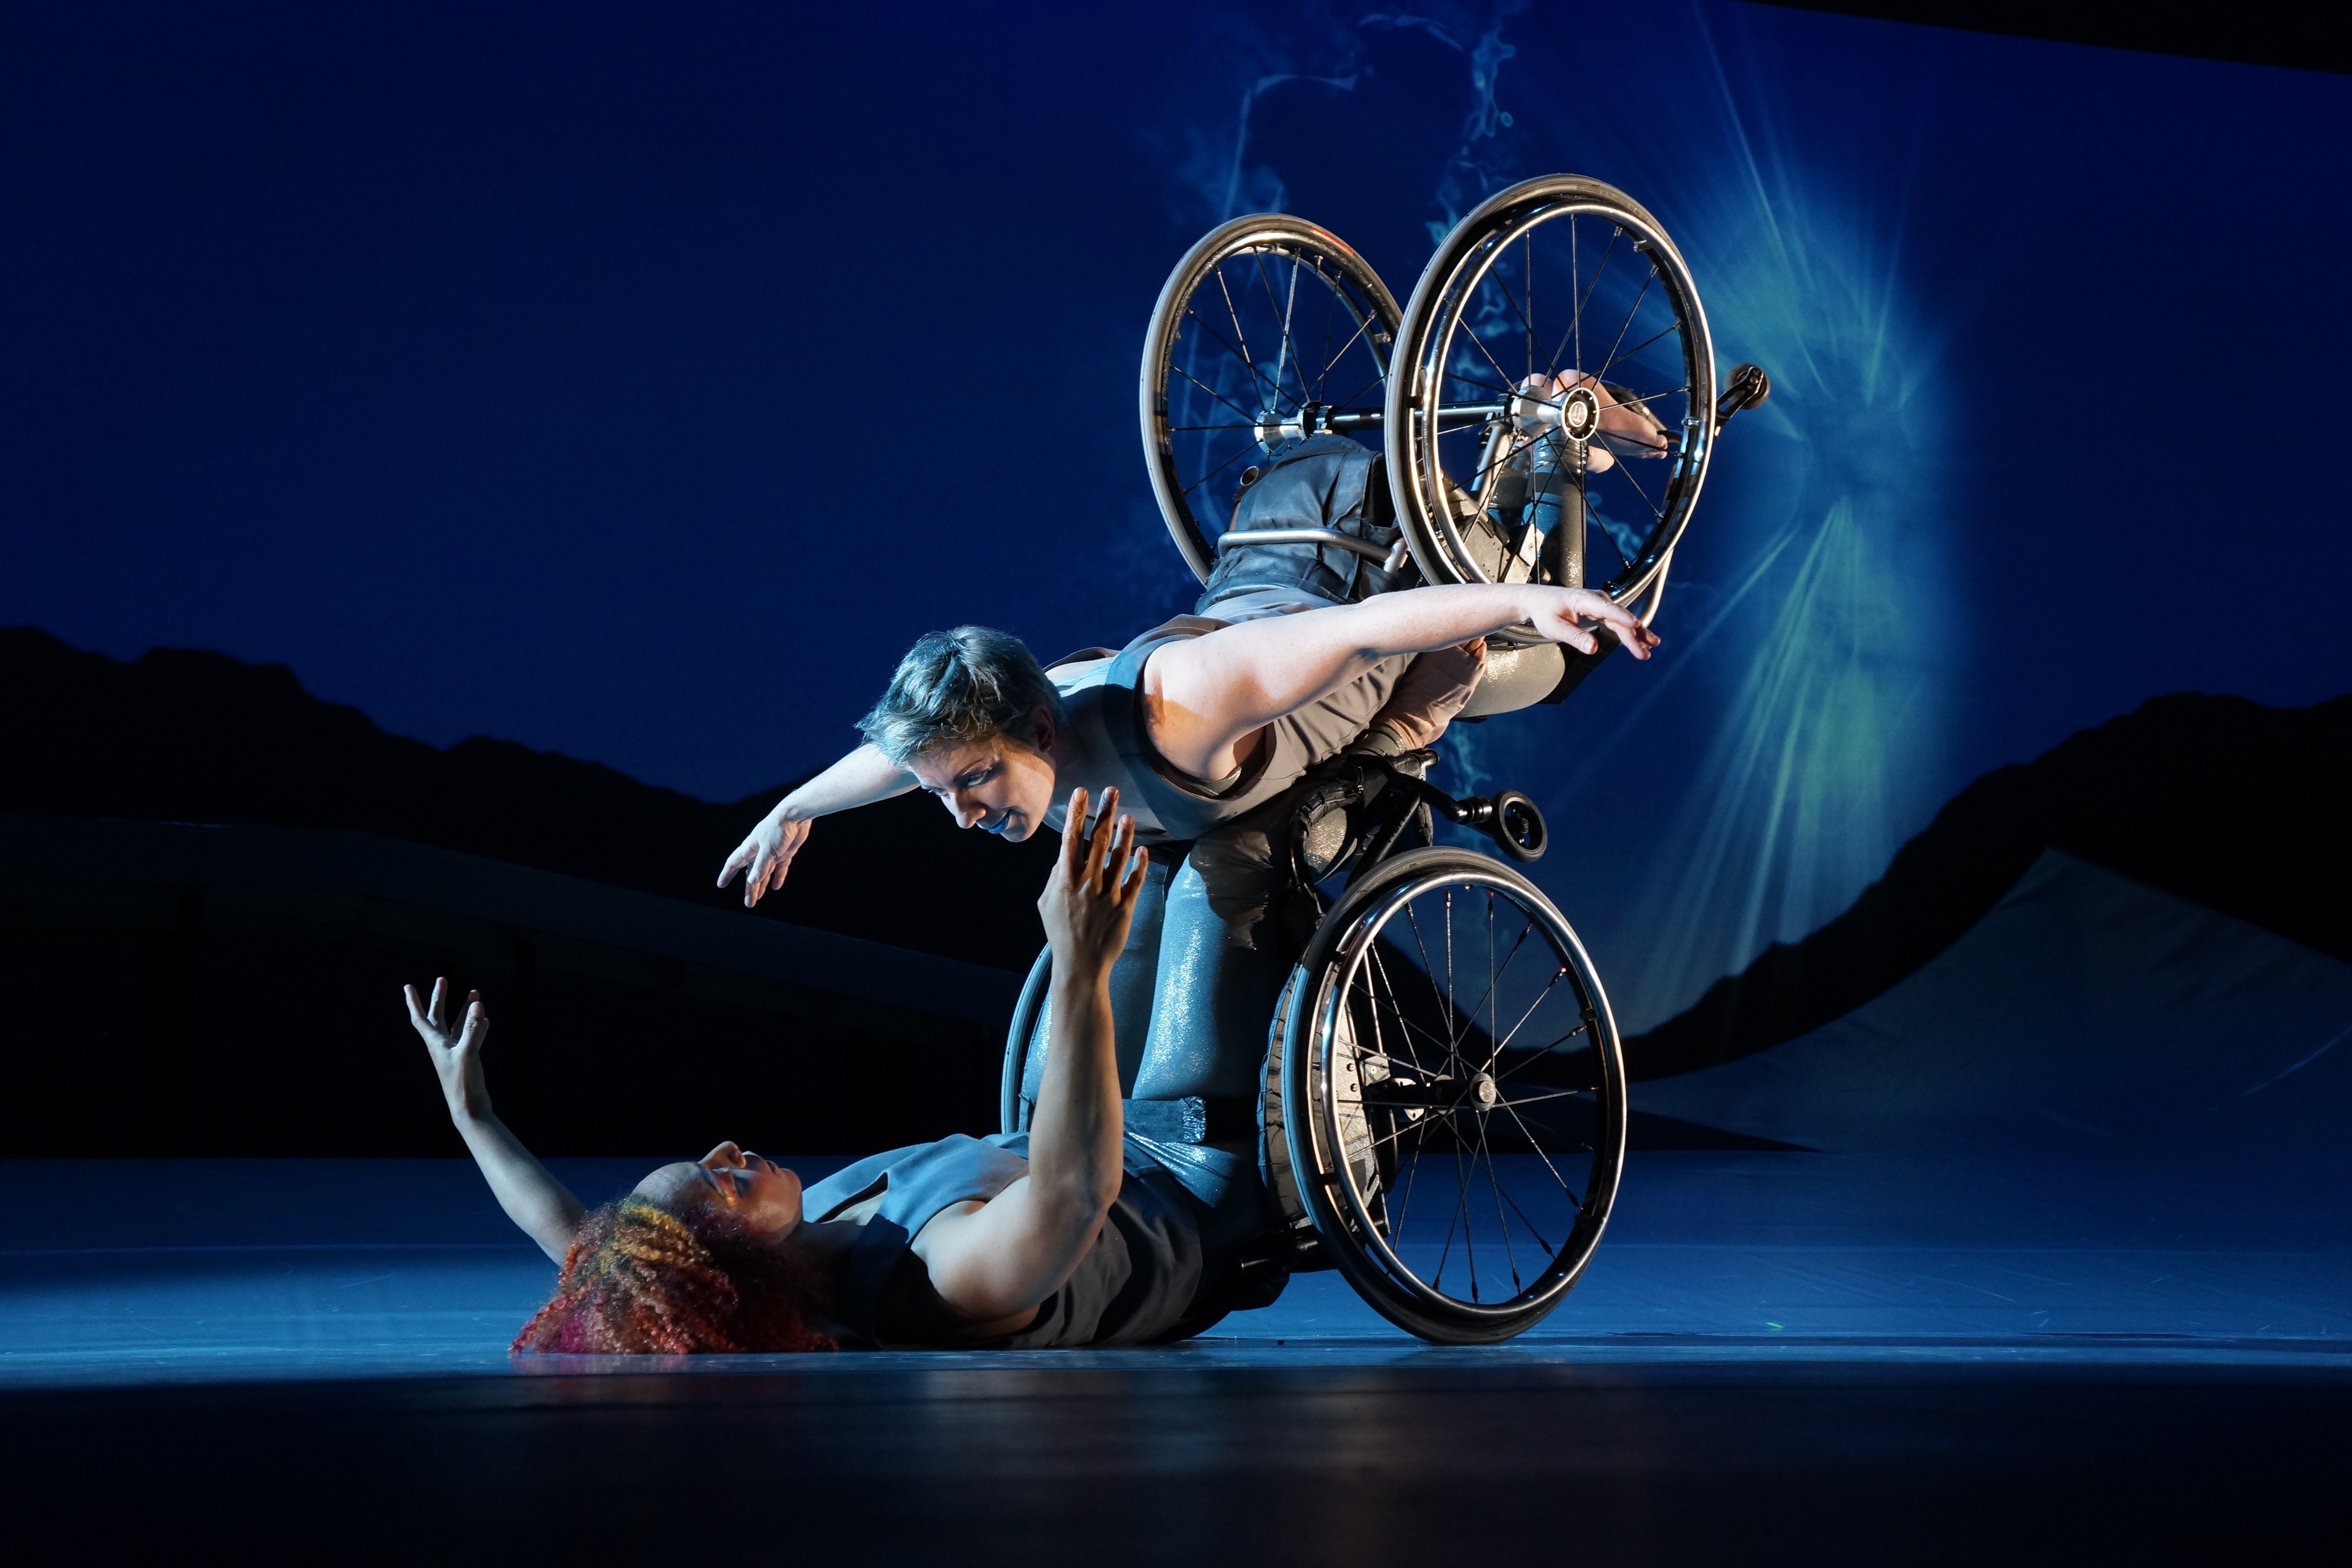 Laurel Lawson, a white woman with short cropped teal hair, is flying in the air with arms spread wide, wheels spinning, and supported by Alice Sheppard. Alice, a multiracial Black woman with coffee-colored hair, is lifting from the ground below. They are making eye contact and smiling. A burst of white light appears in a dark blue sky. Photo by Jay Newman / BRITT Festival.